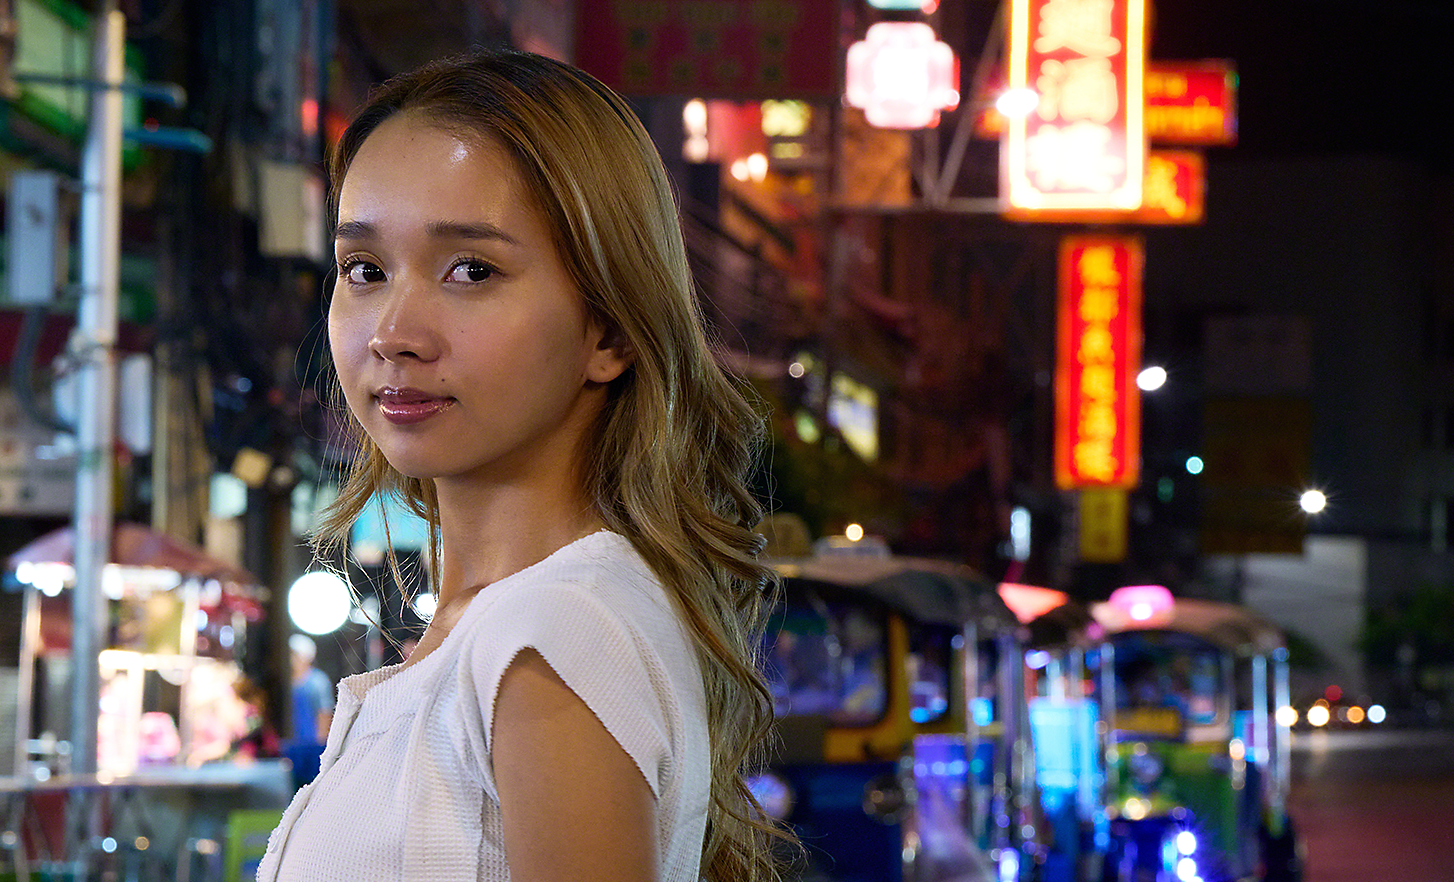 Portrait of a young woman on a busy city street at night